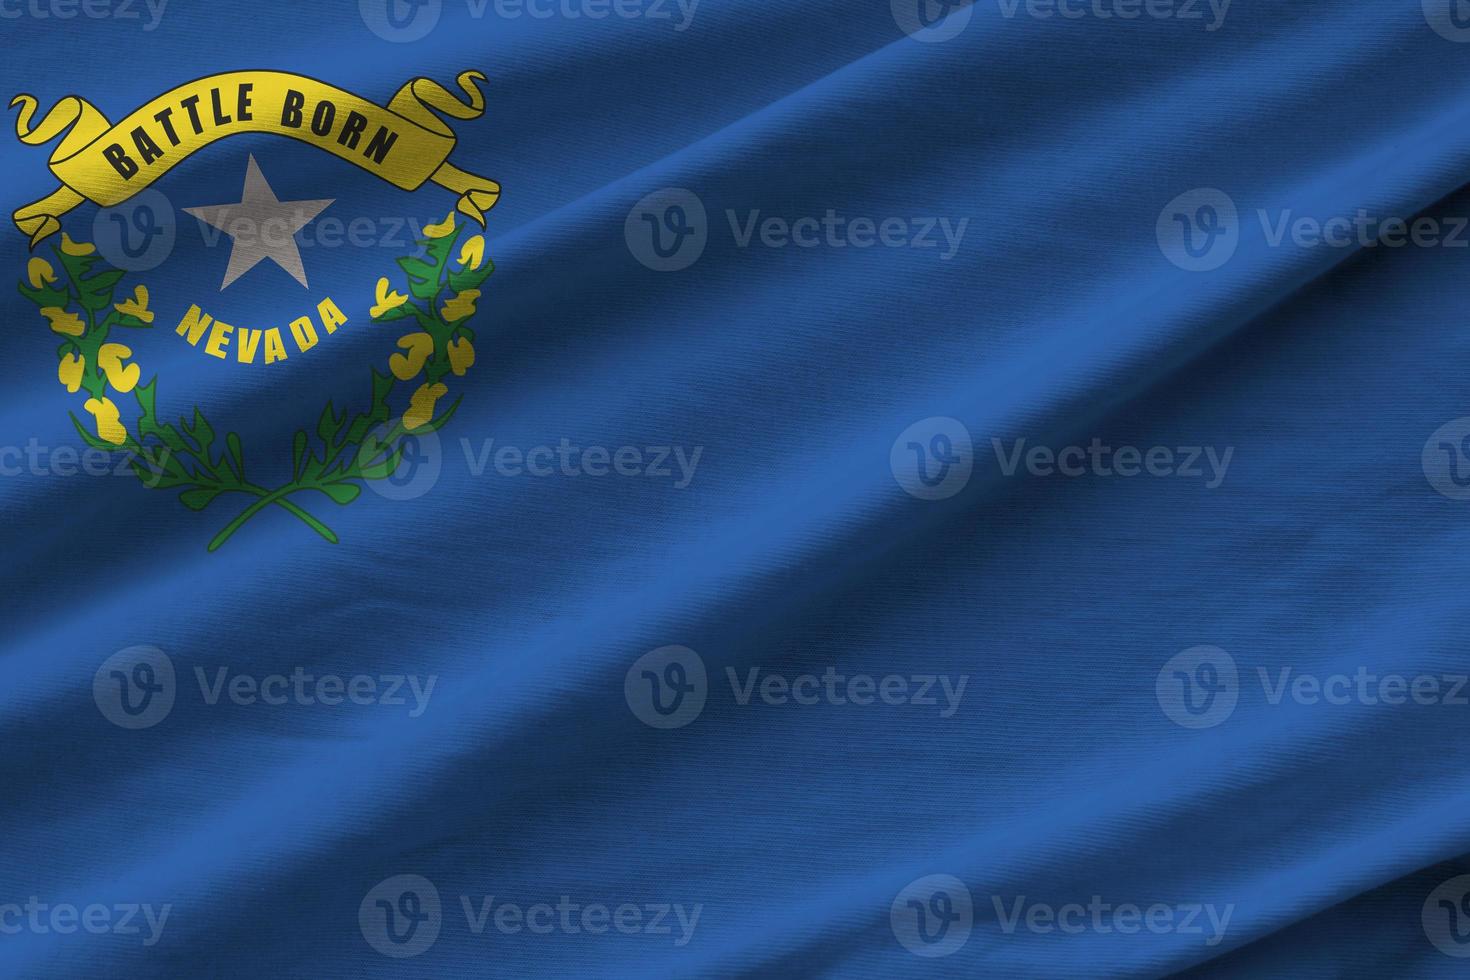 Nevada US state flag with big folds waving close up under the studio light indoors. The official symbols and colors in banner photo